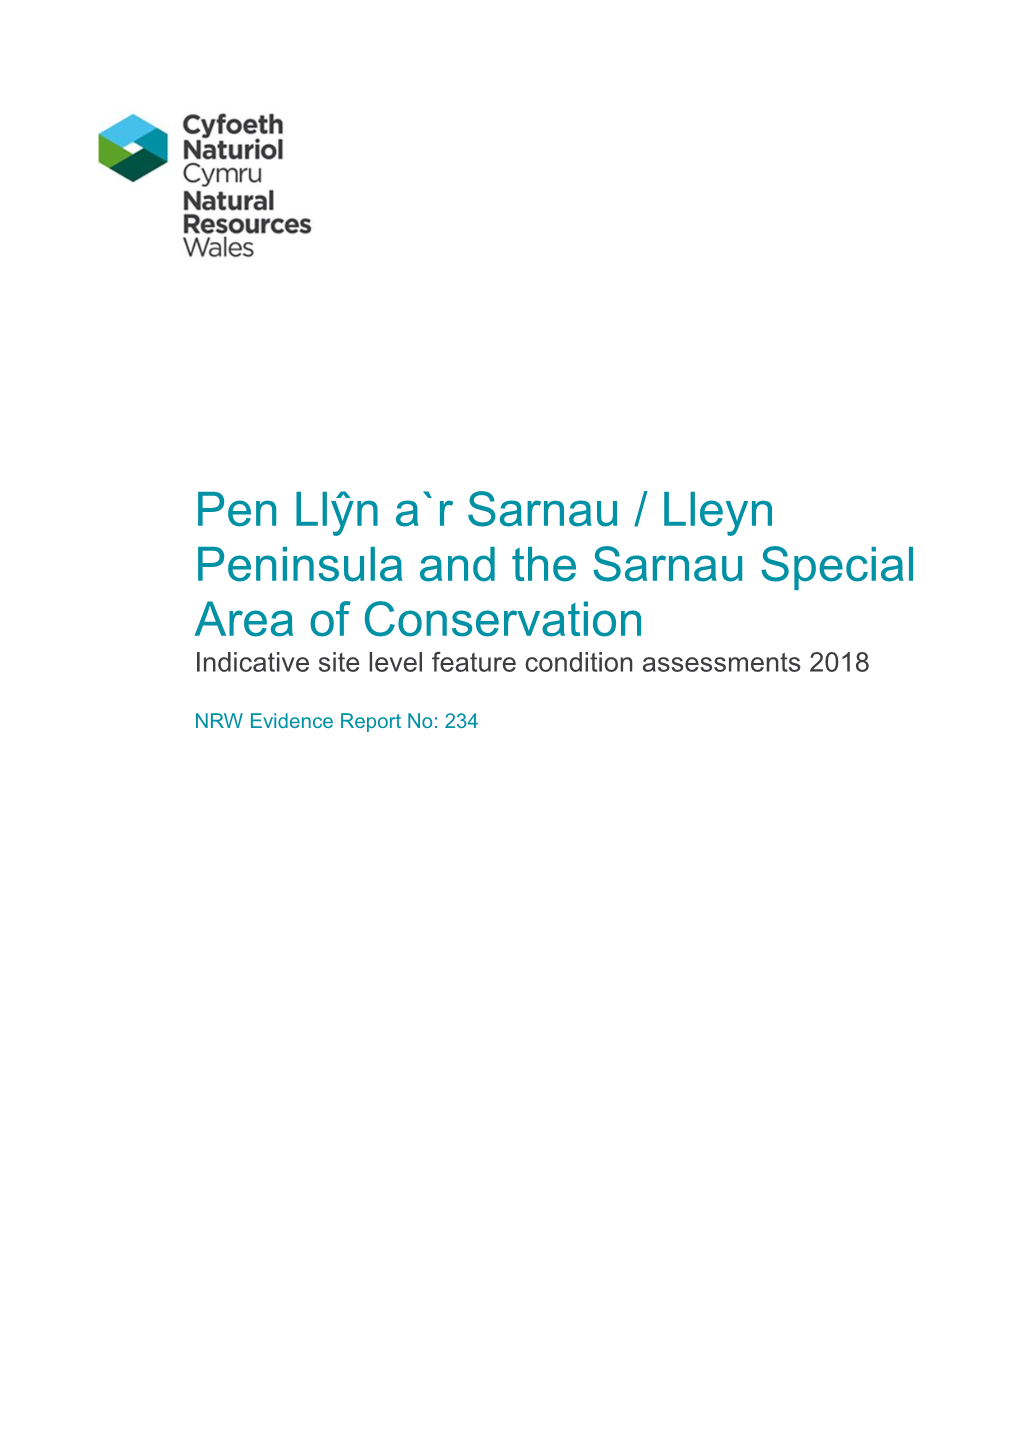 Lleyn Peninsula and the Sarnau Special Area of Conservation Indicative Site Level Feature Condition Assessments 2018